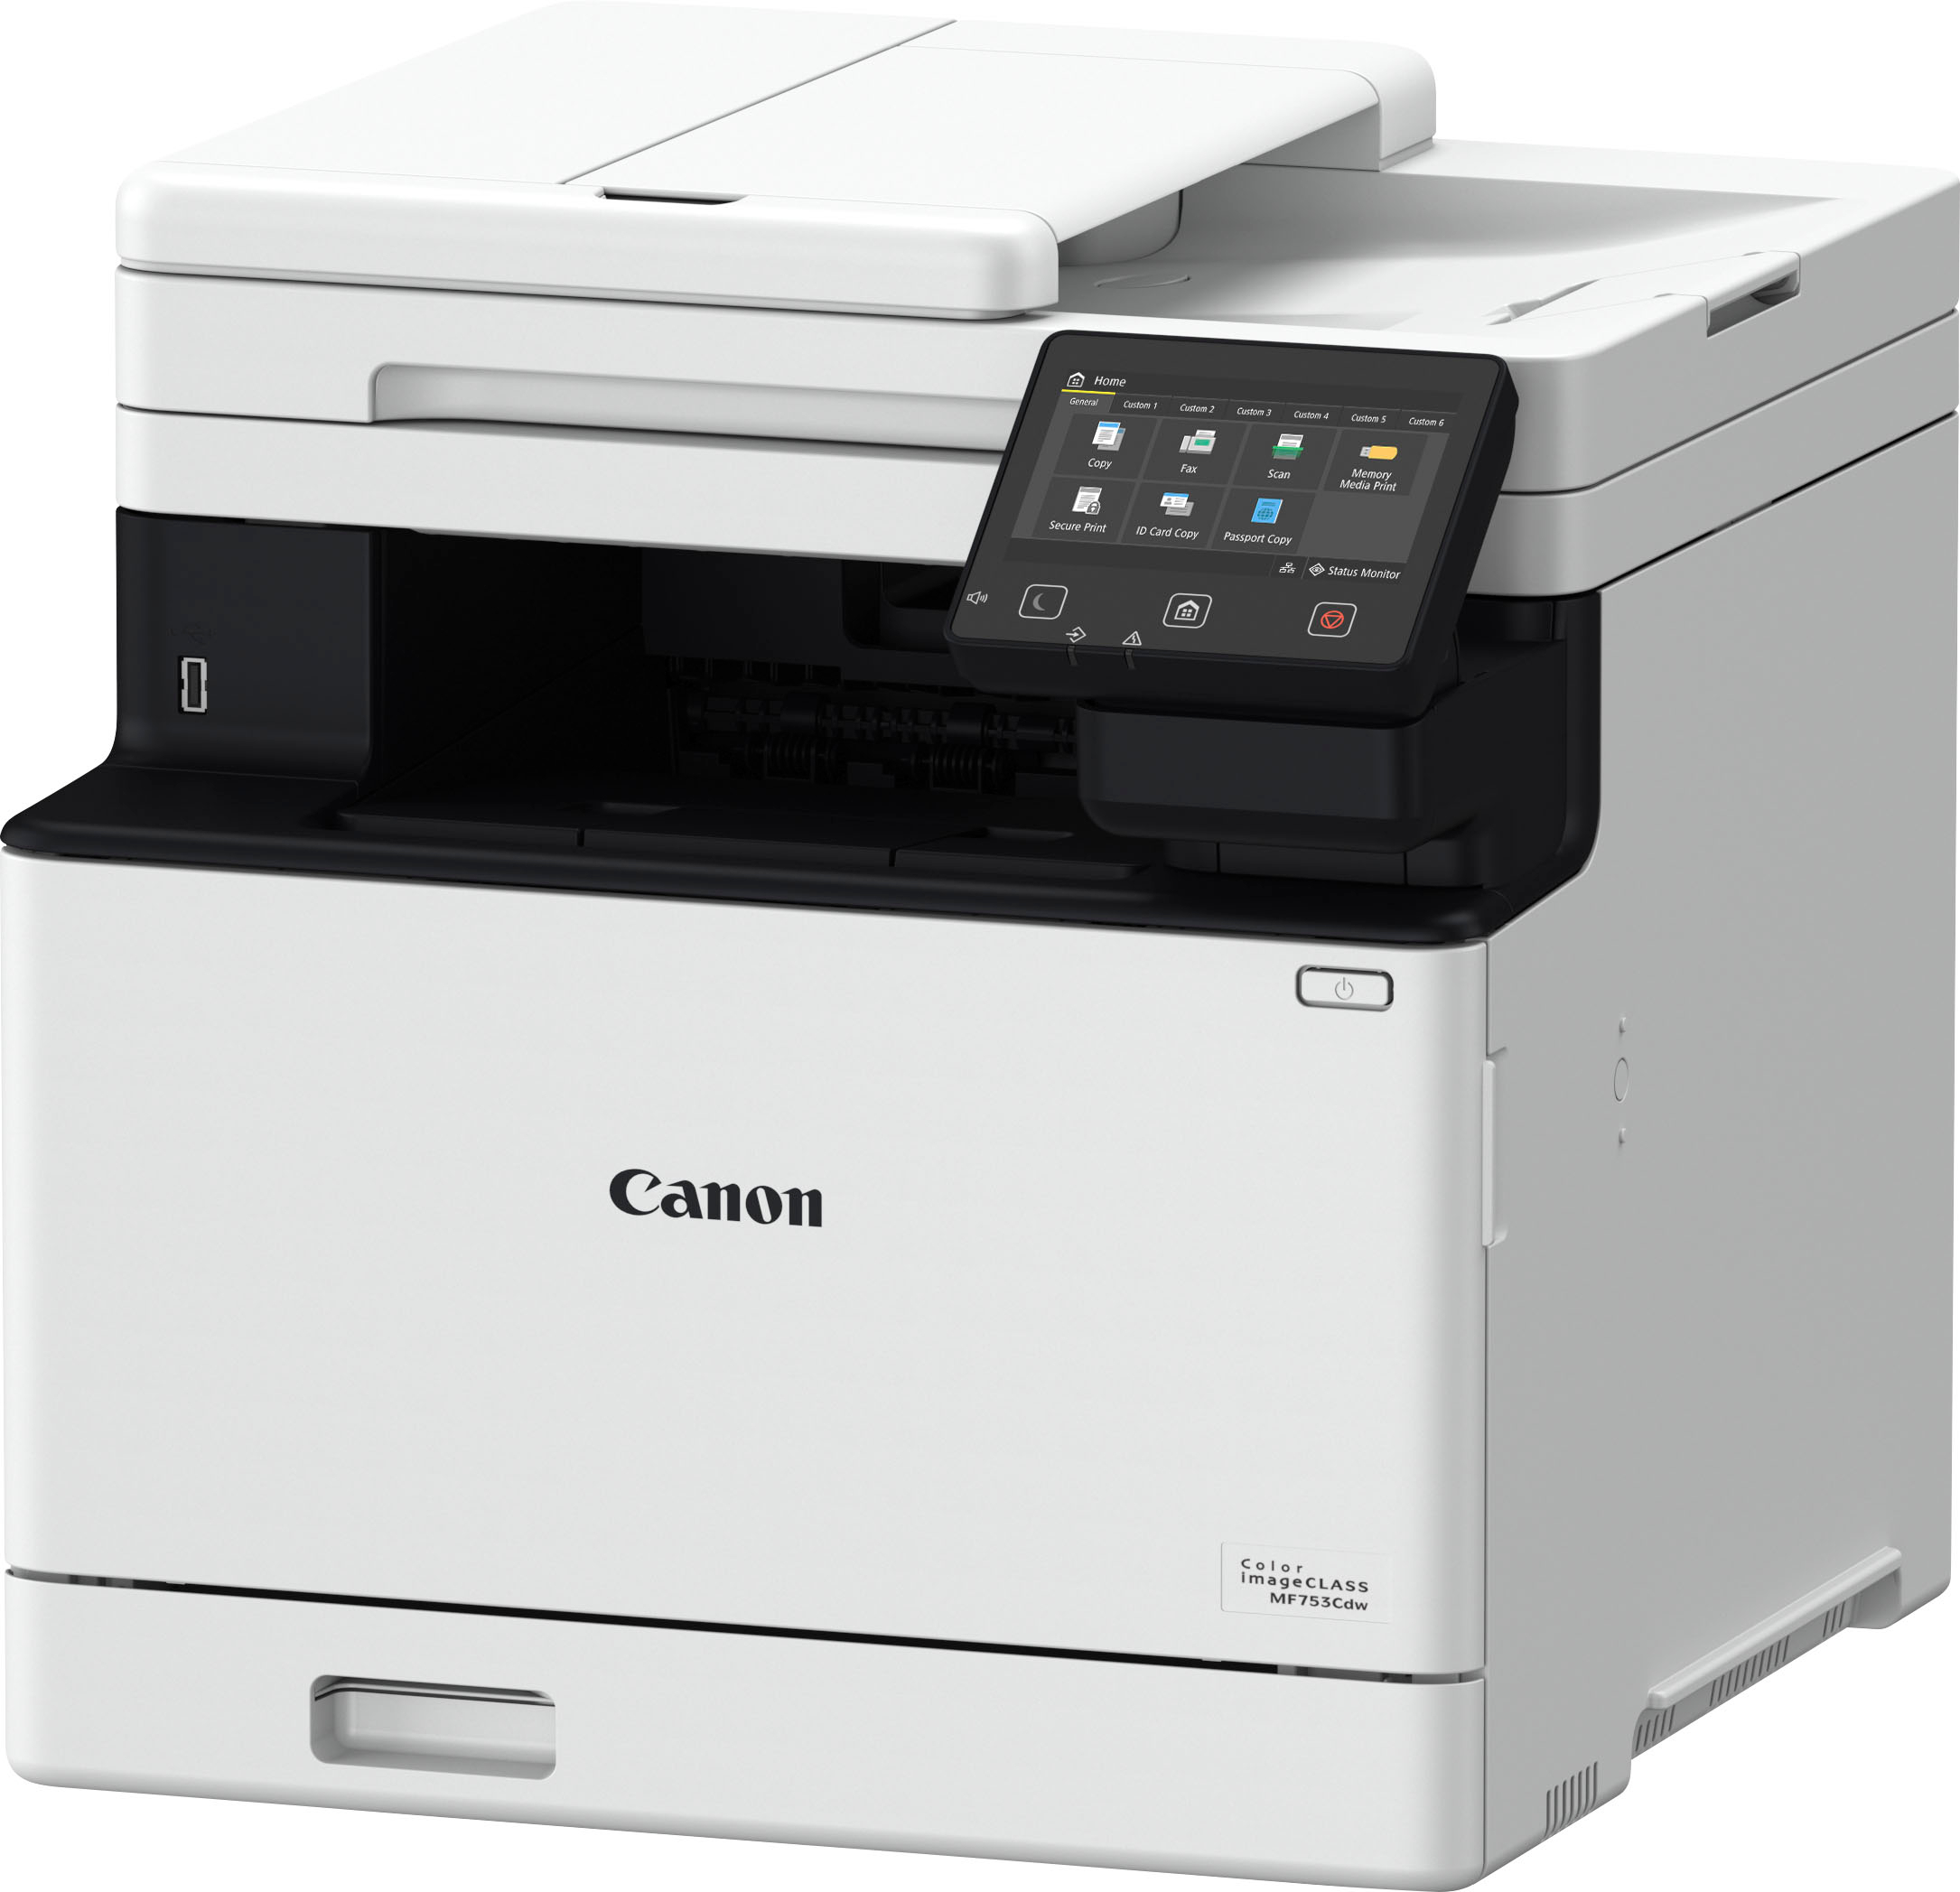 Angle View: Canon - imageCLASS MF753Cdw Wireless Color All-In-One Laser Printer with Fax - White